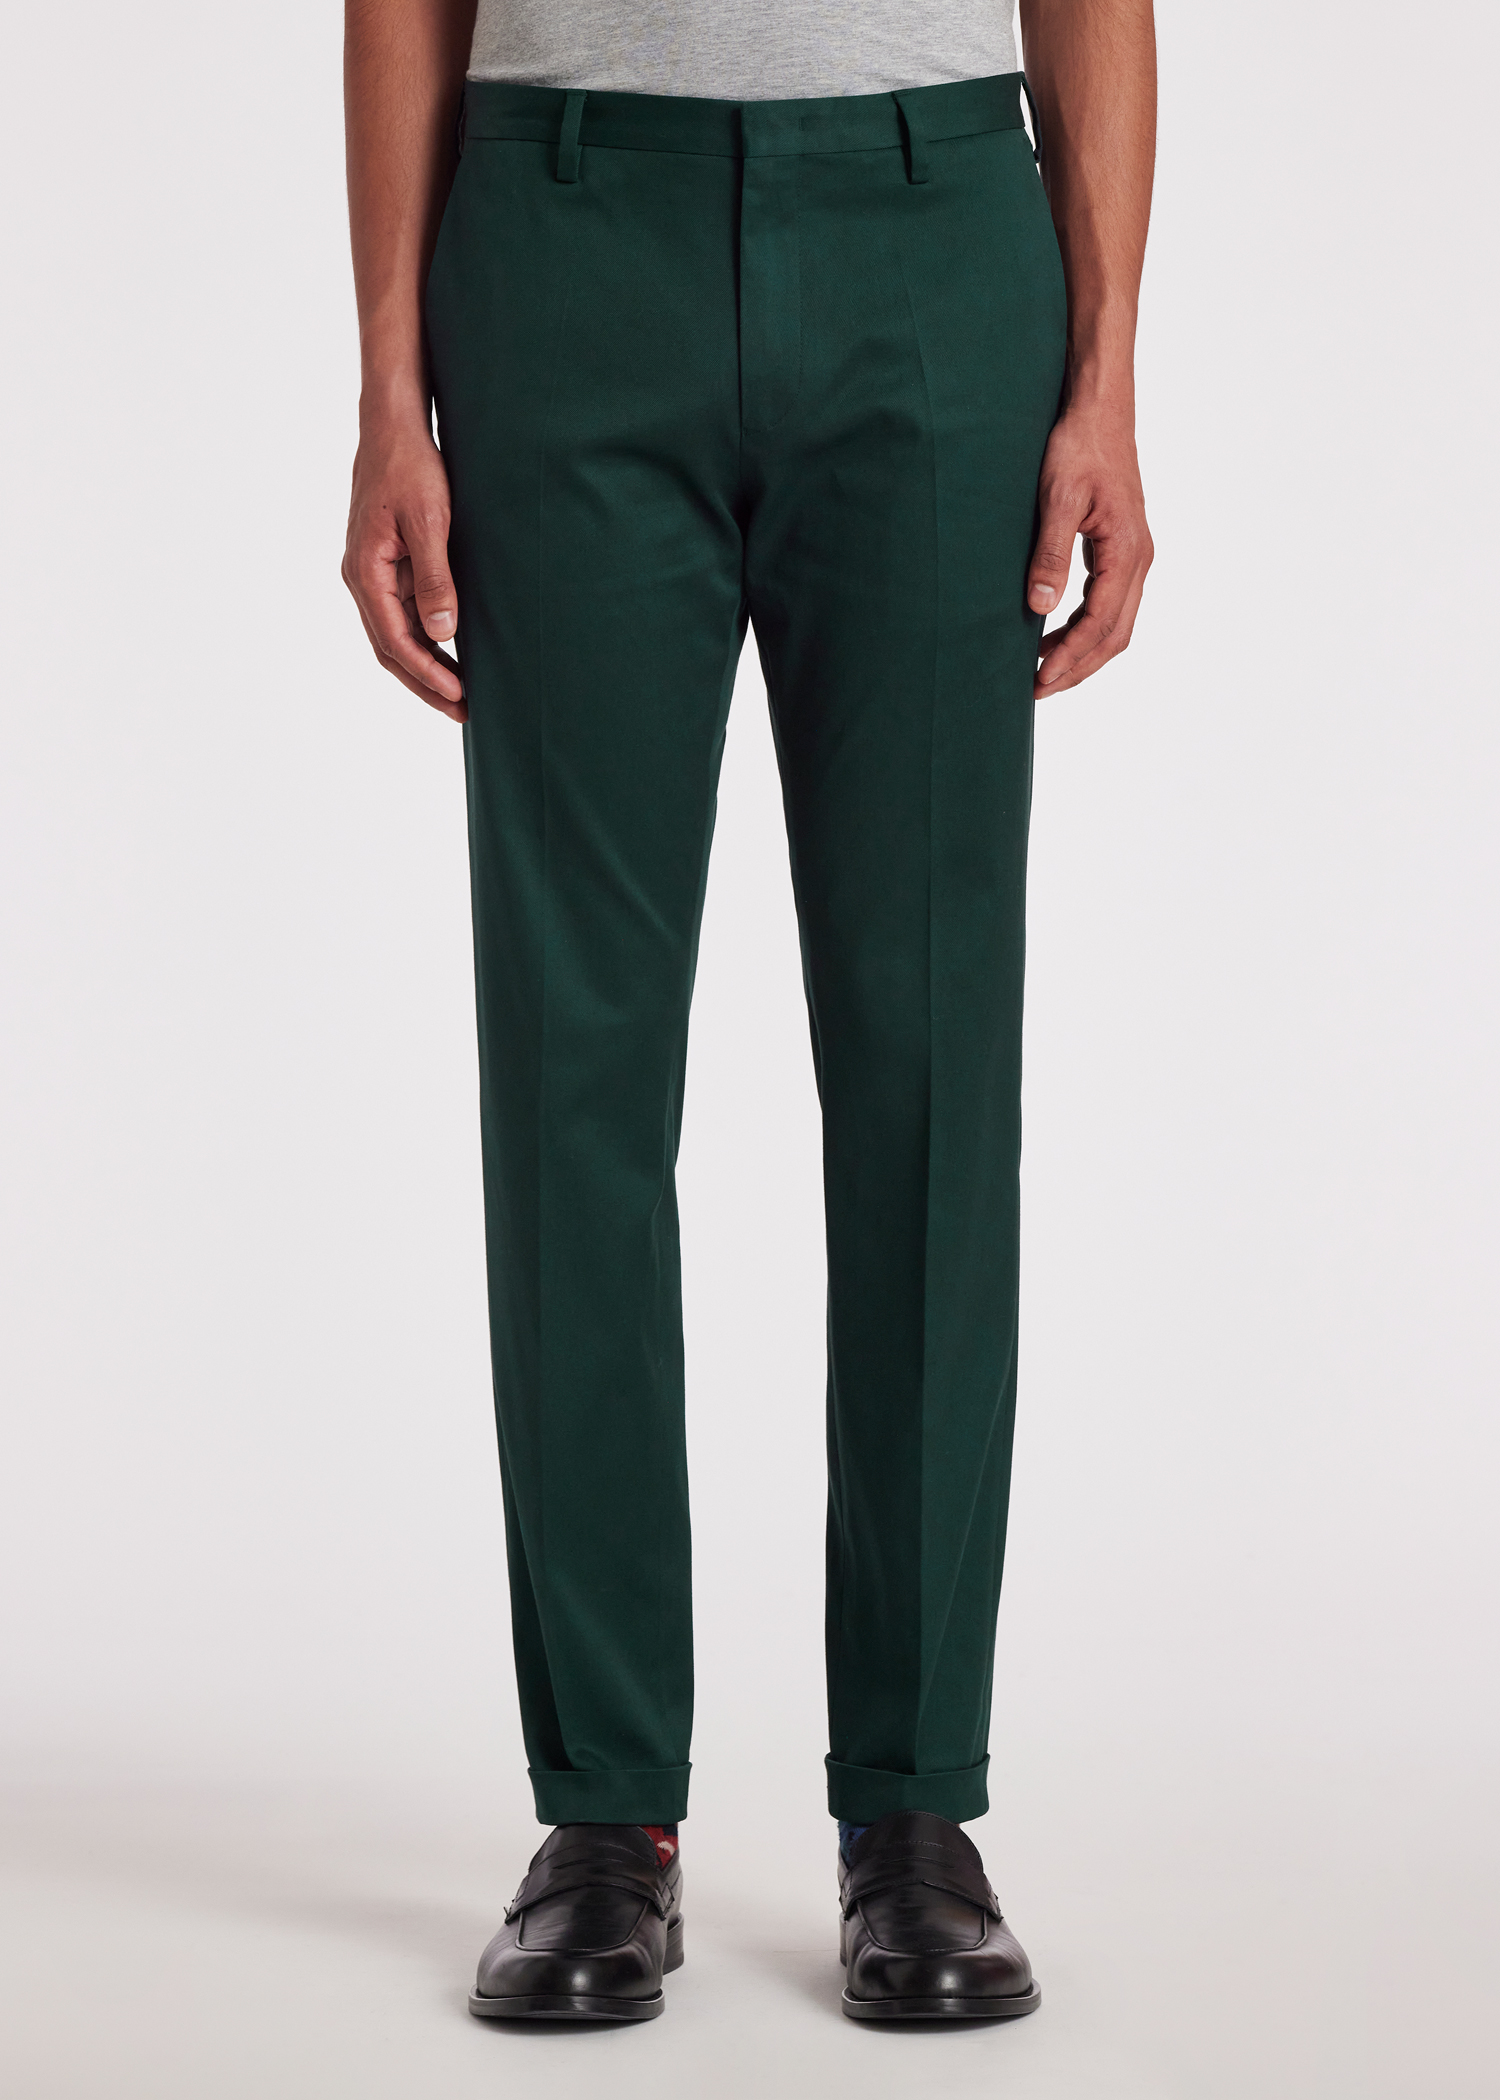 Paul Smith - Drawcord Trousers - Olive Green - Mr & Mrs Stitch